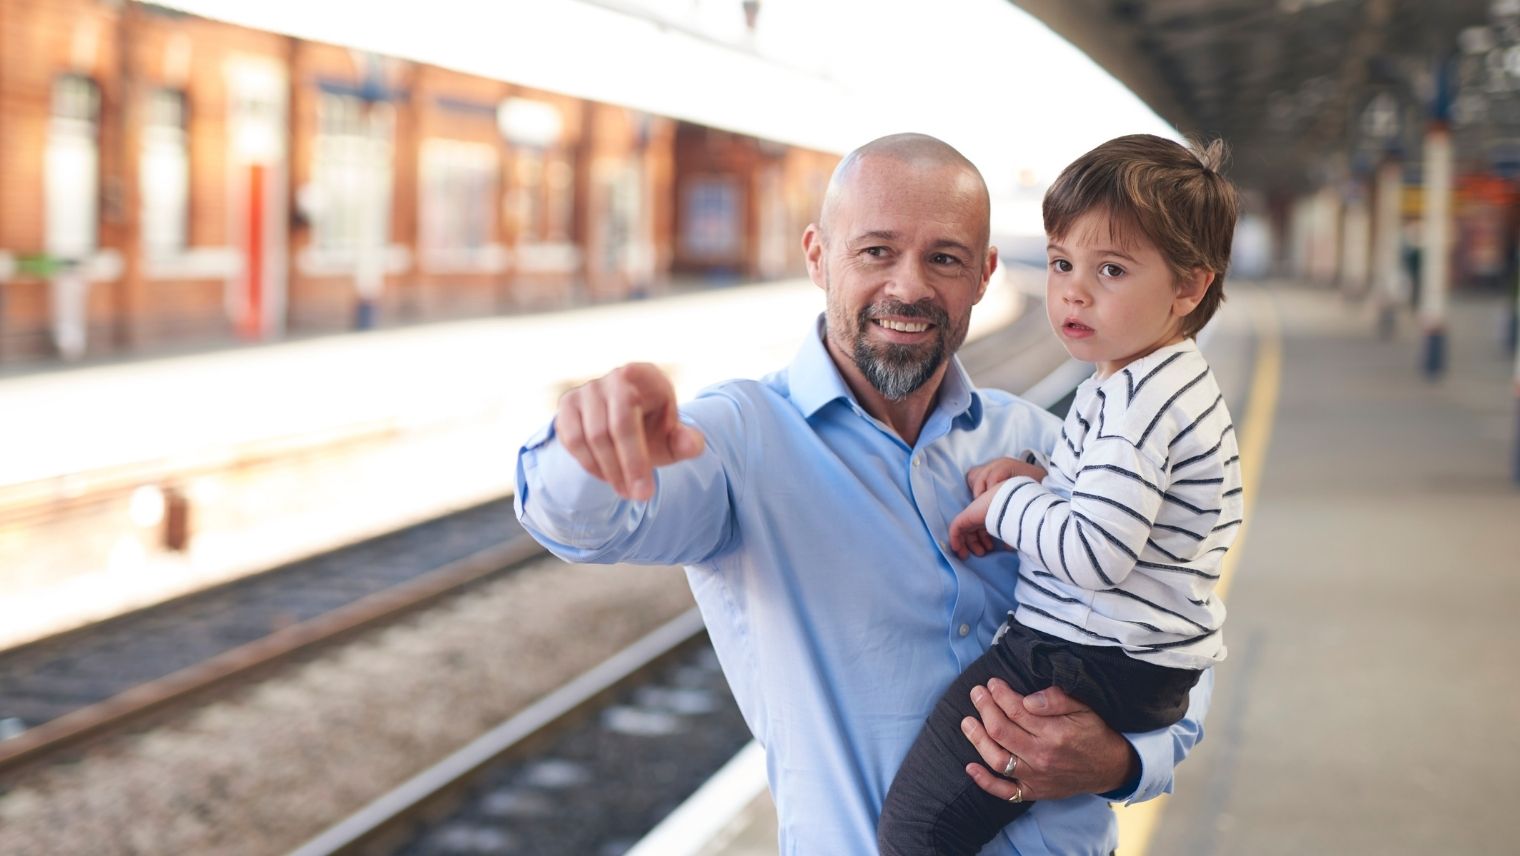 A father pointing out a train to a child being held in his arms